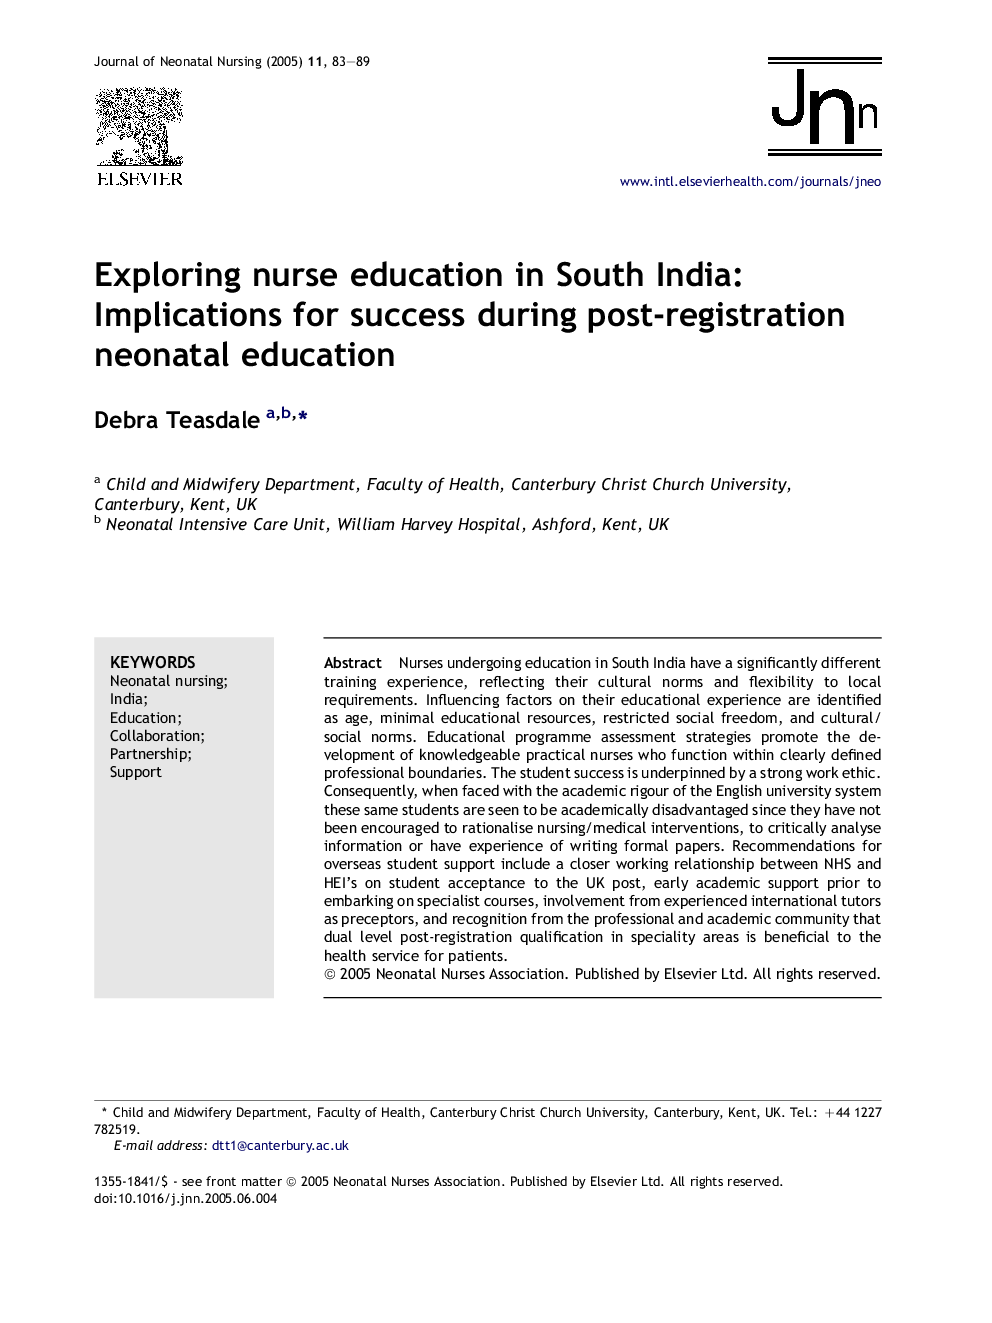 Exploring nurse education in South India: Implications for success during post-registration neonatal education